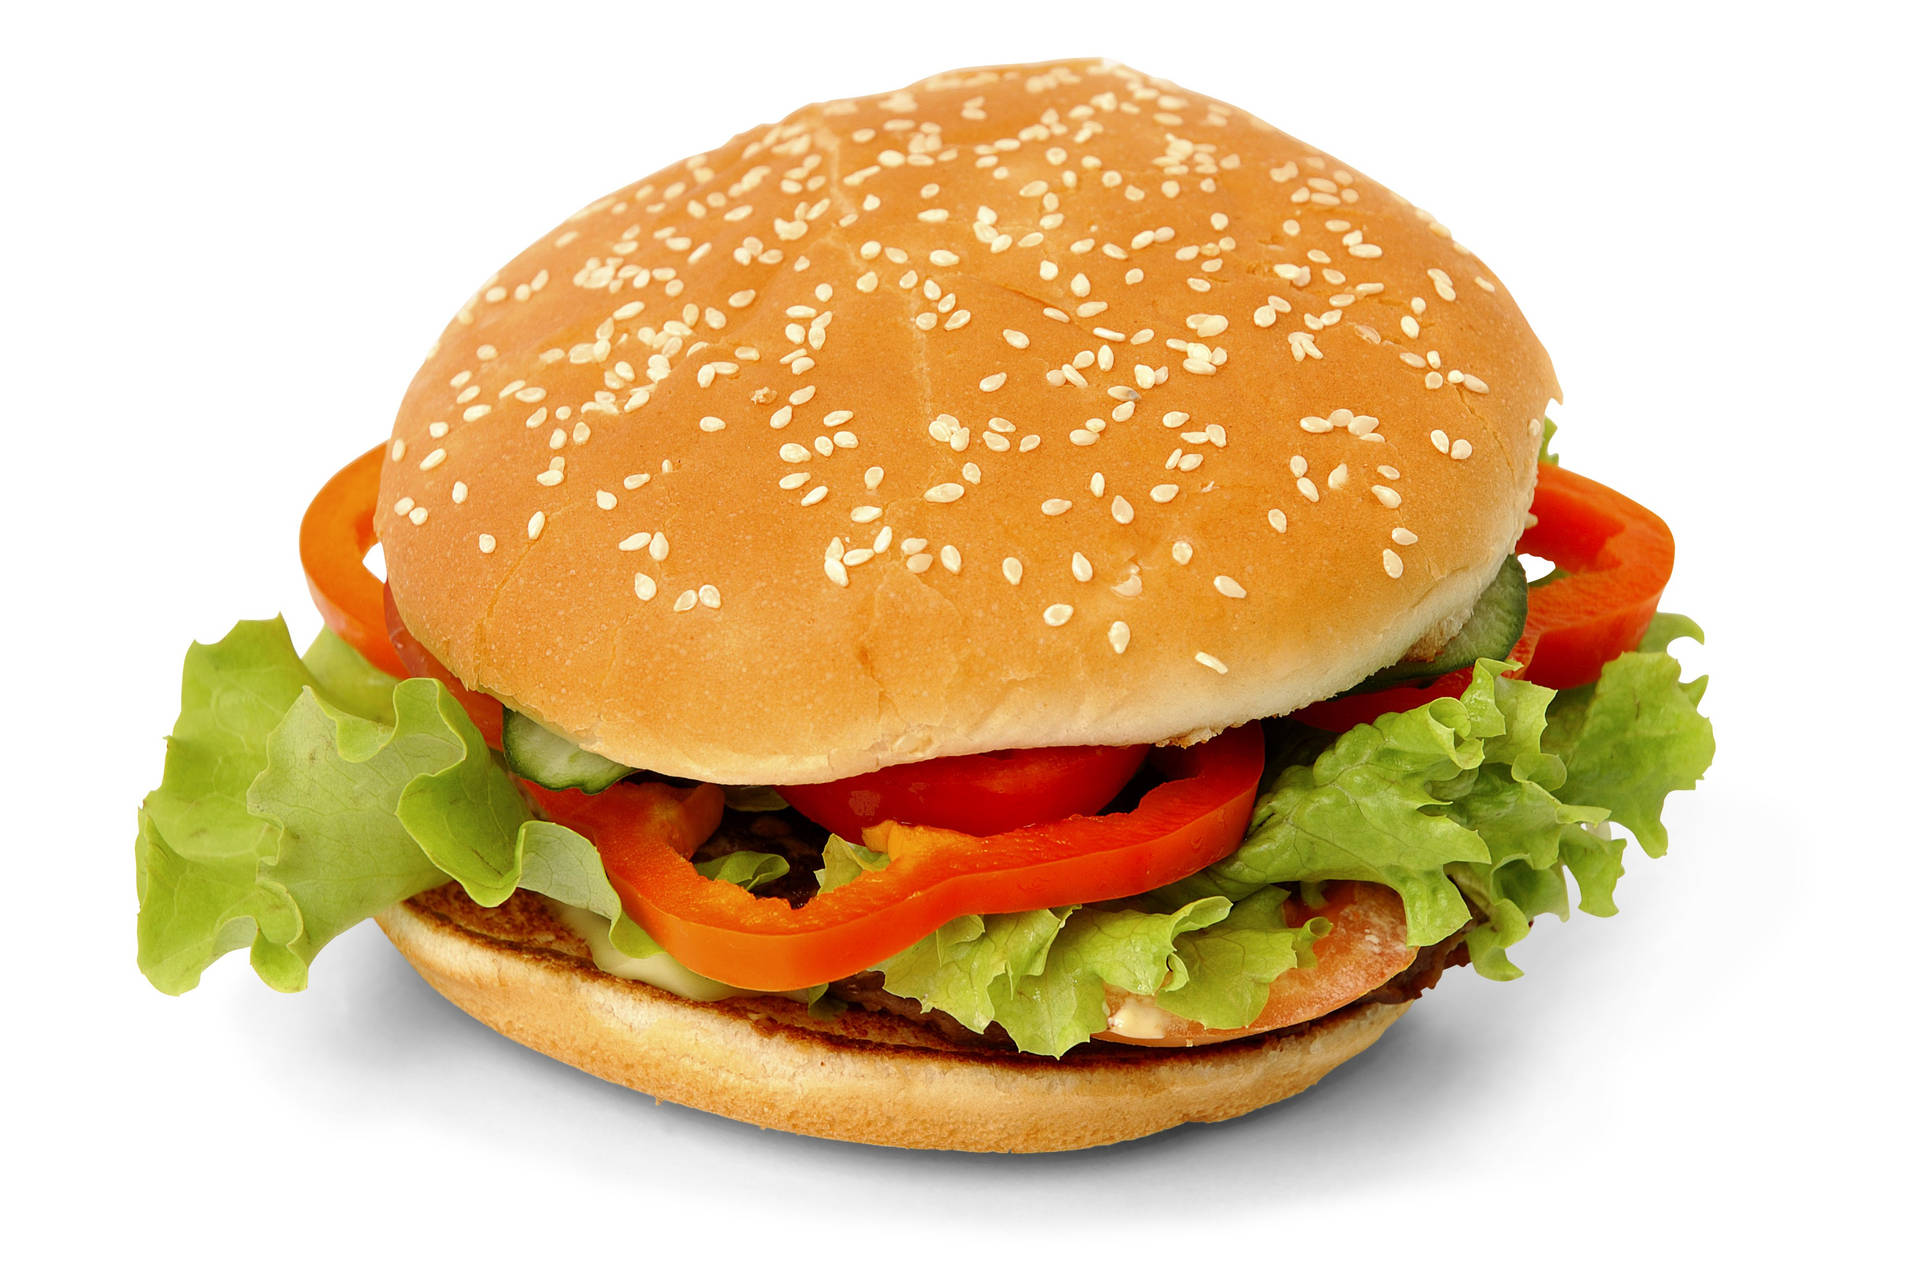 Cheeseburger On A White Background Wallpaper